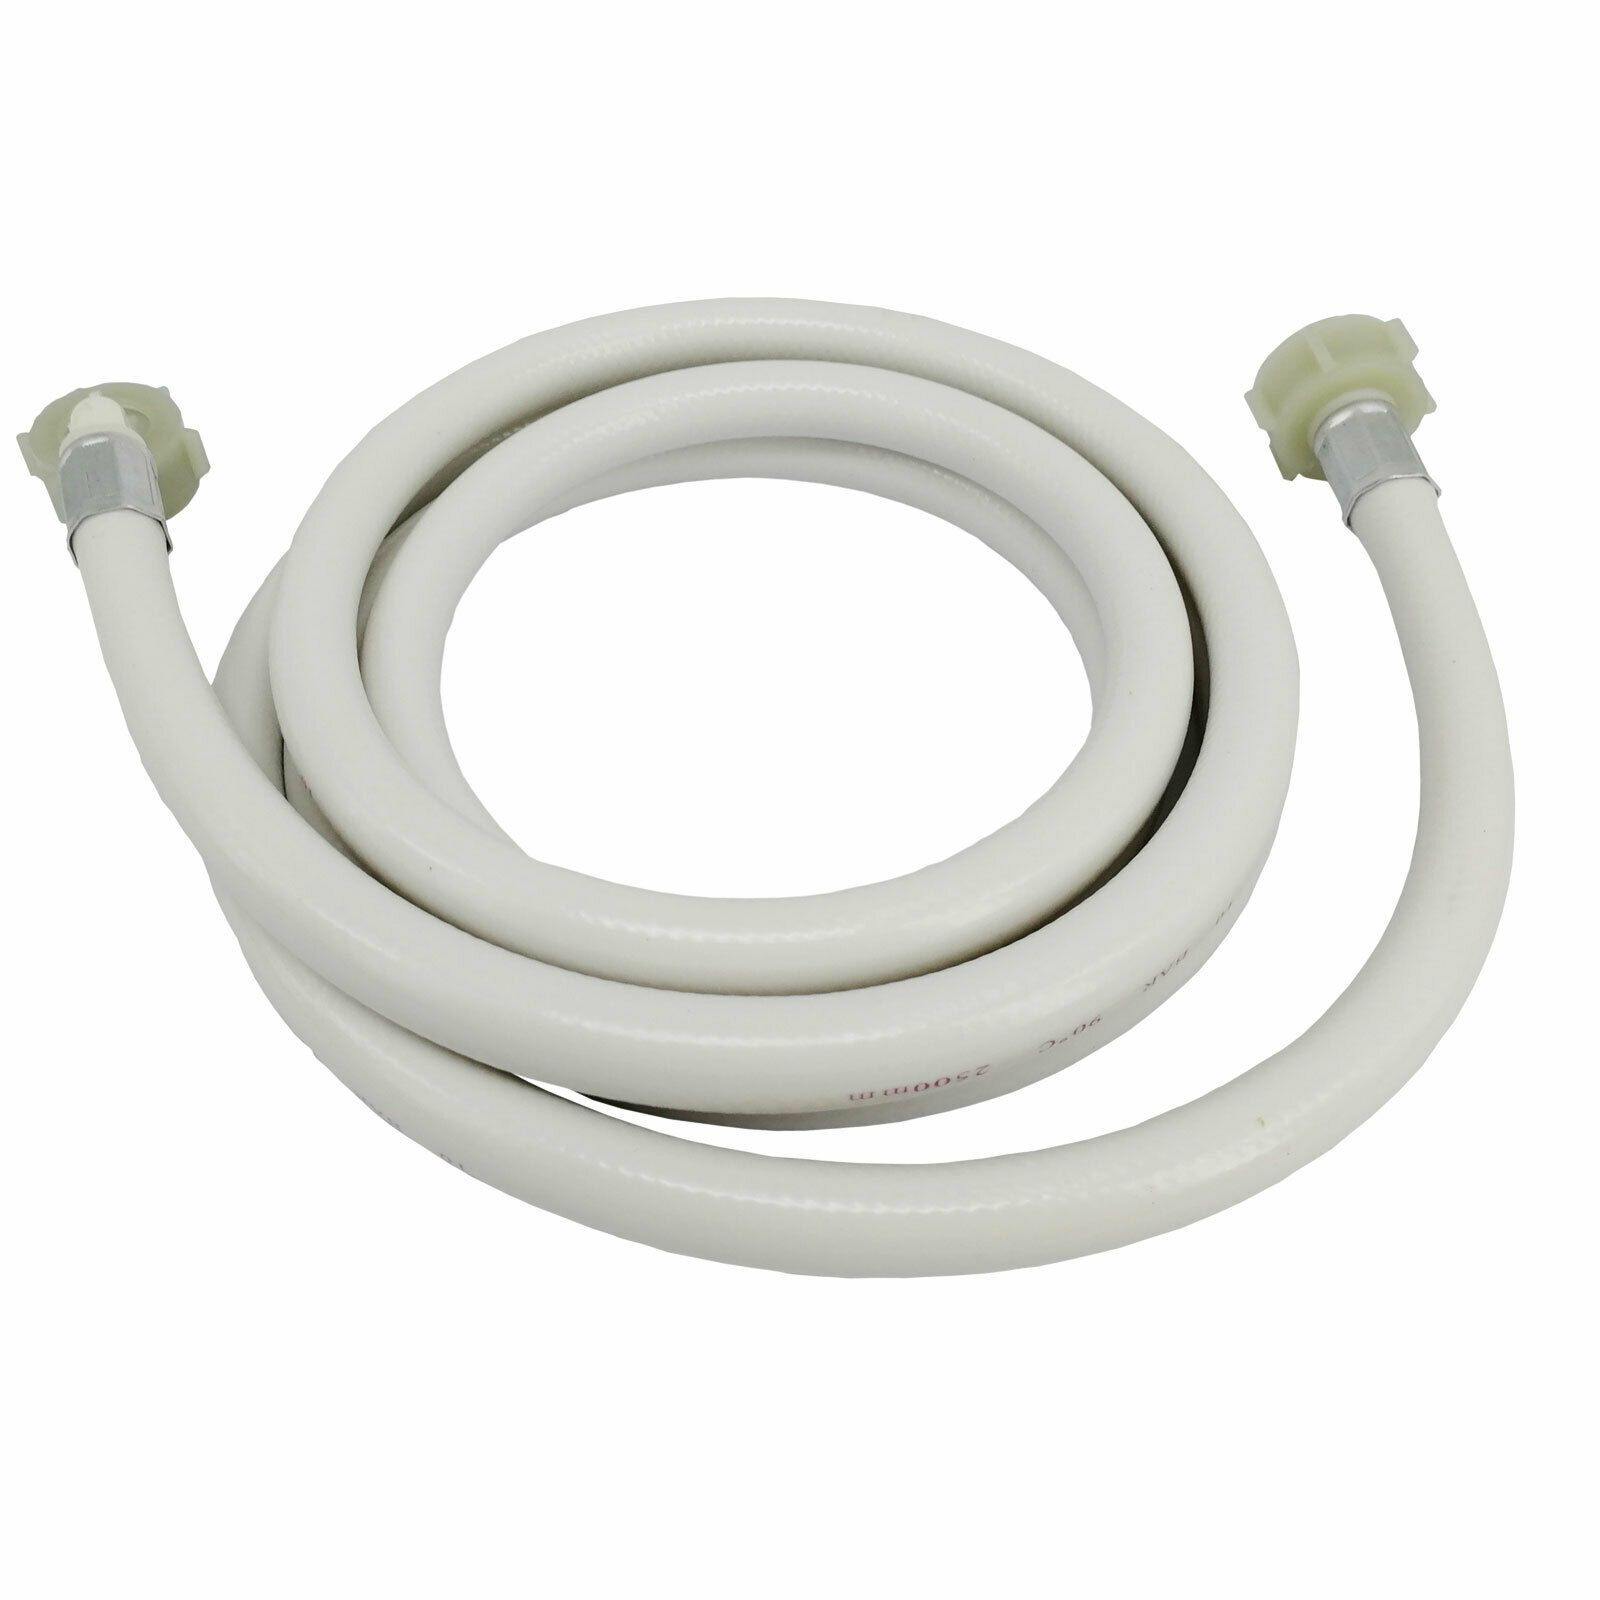 Hot/Cold Inlet Water Hose 2.5M For LG WD1013NDW WT-R10686 WV5-1275W WTW1409HCW Sparesbarn